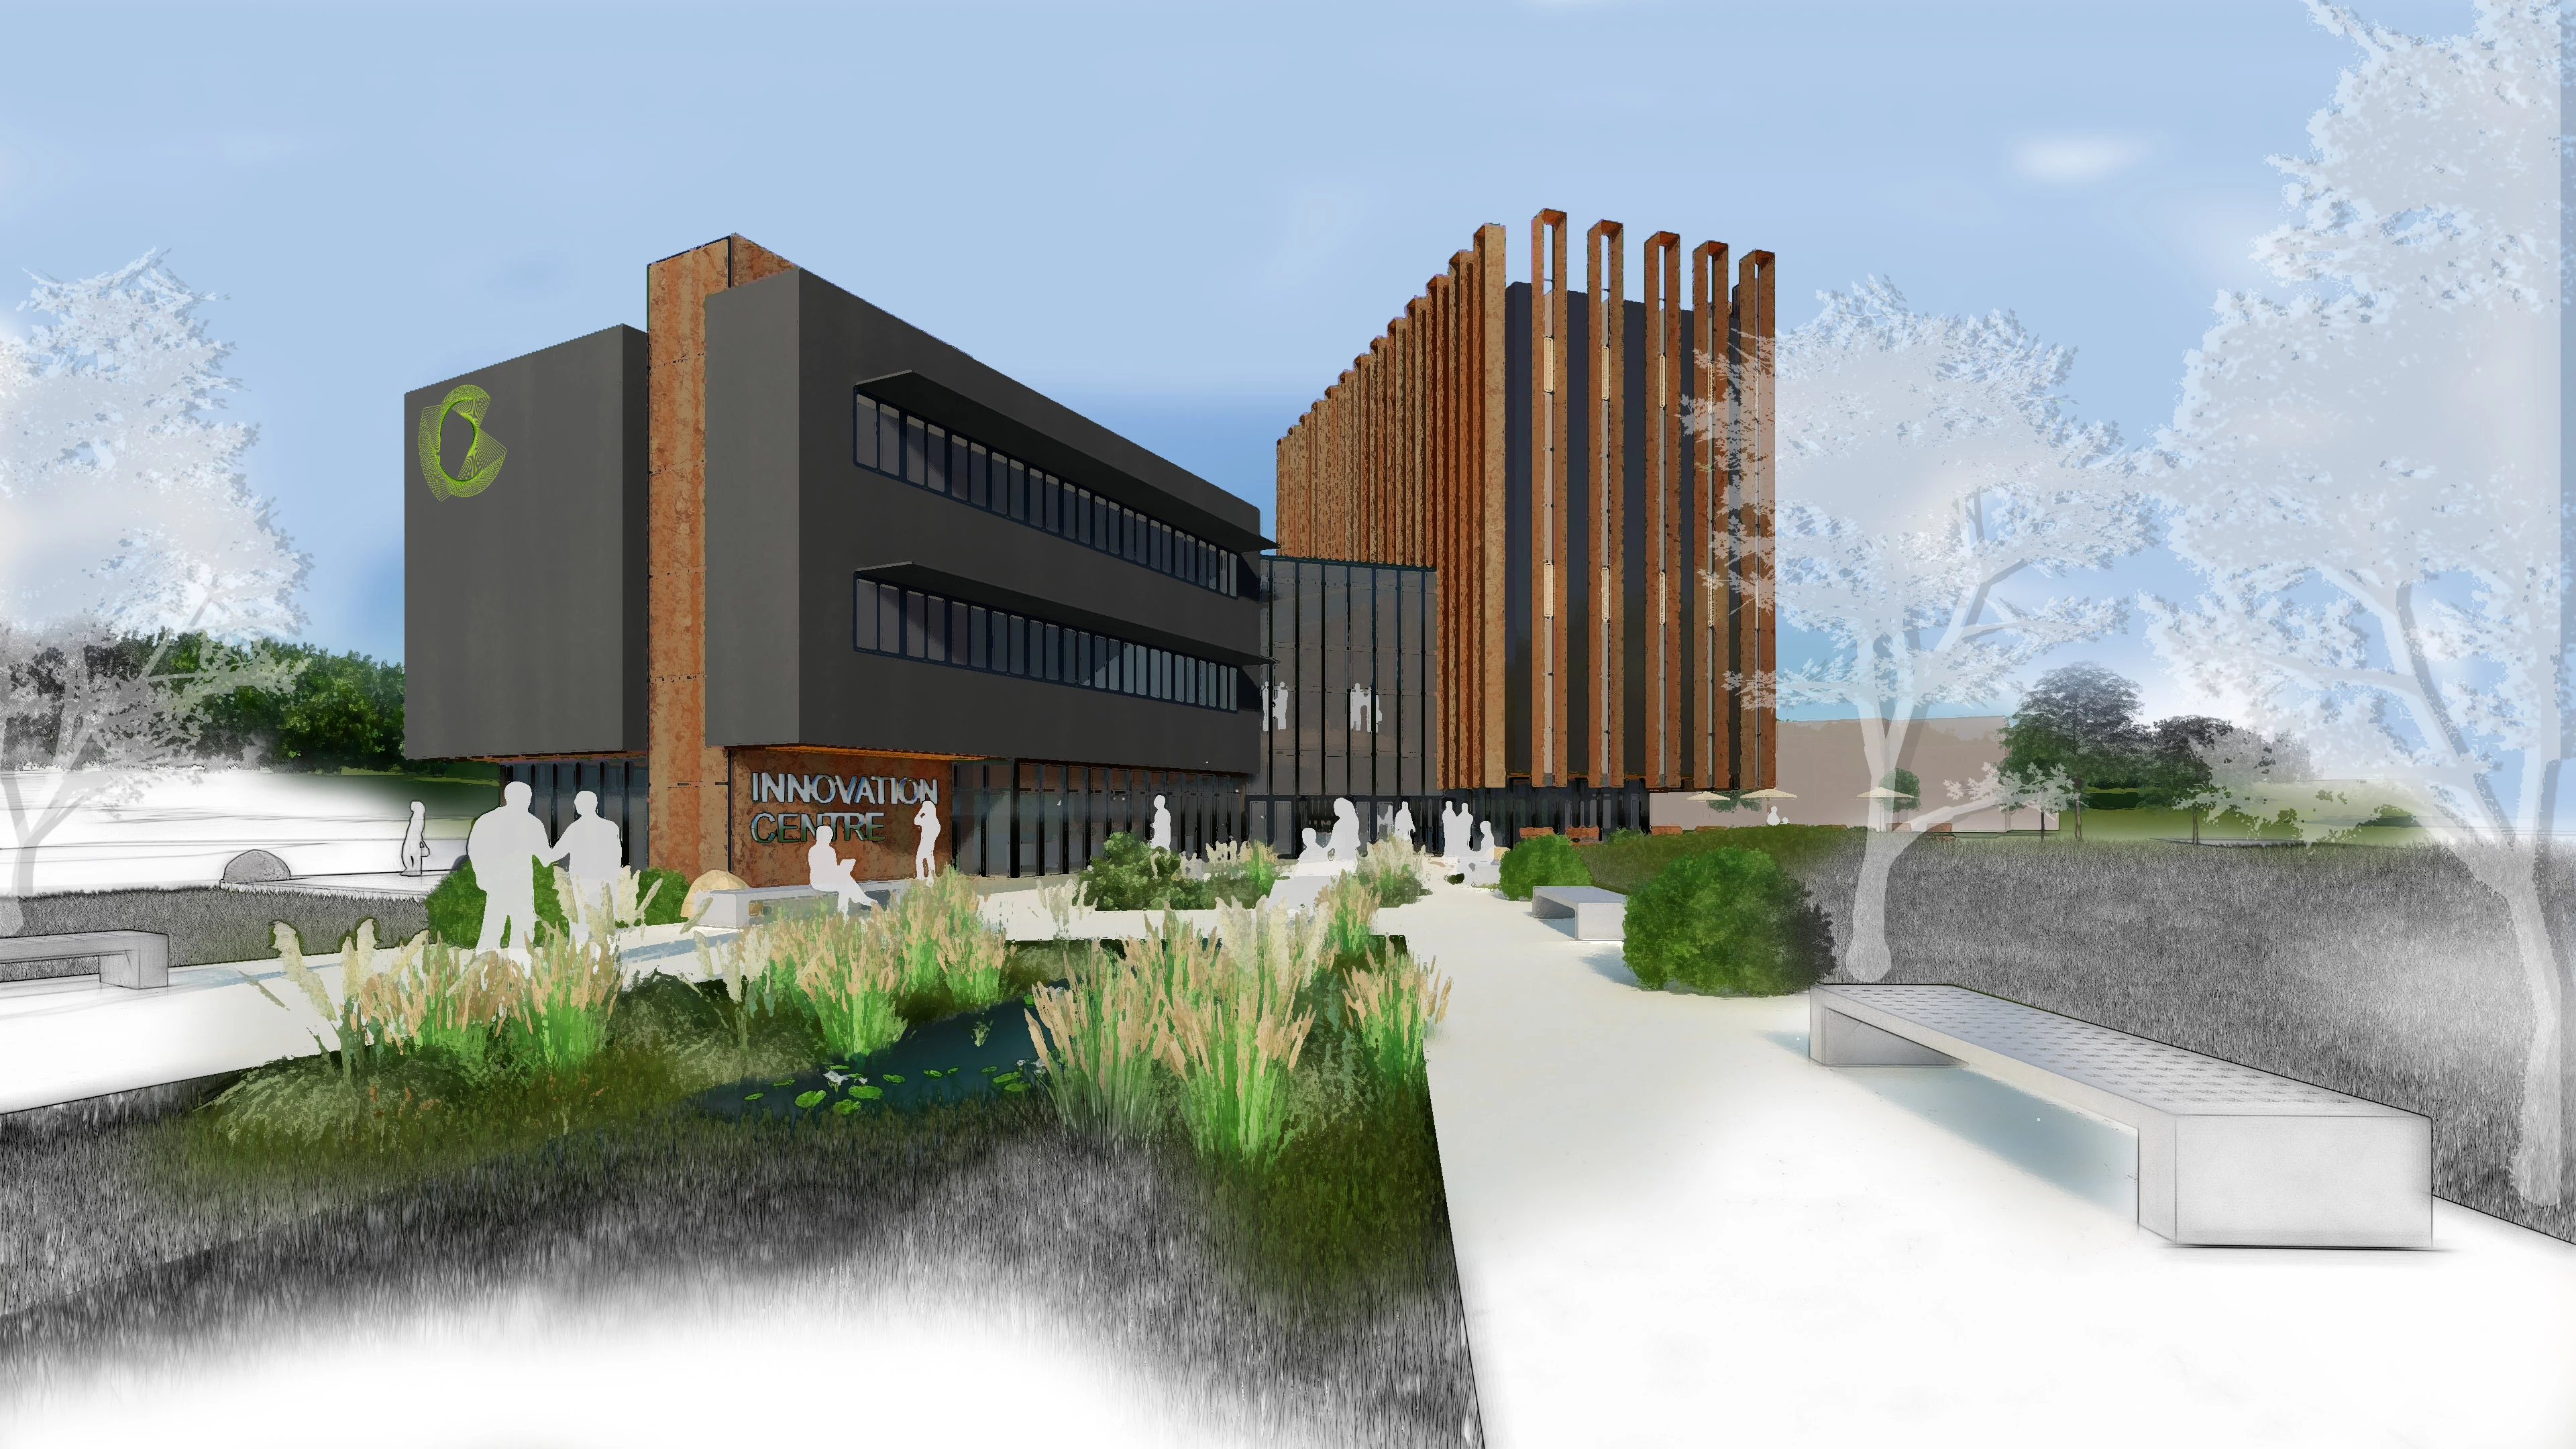 An initial CGI showing how the Innovation Centre could look